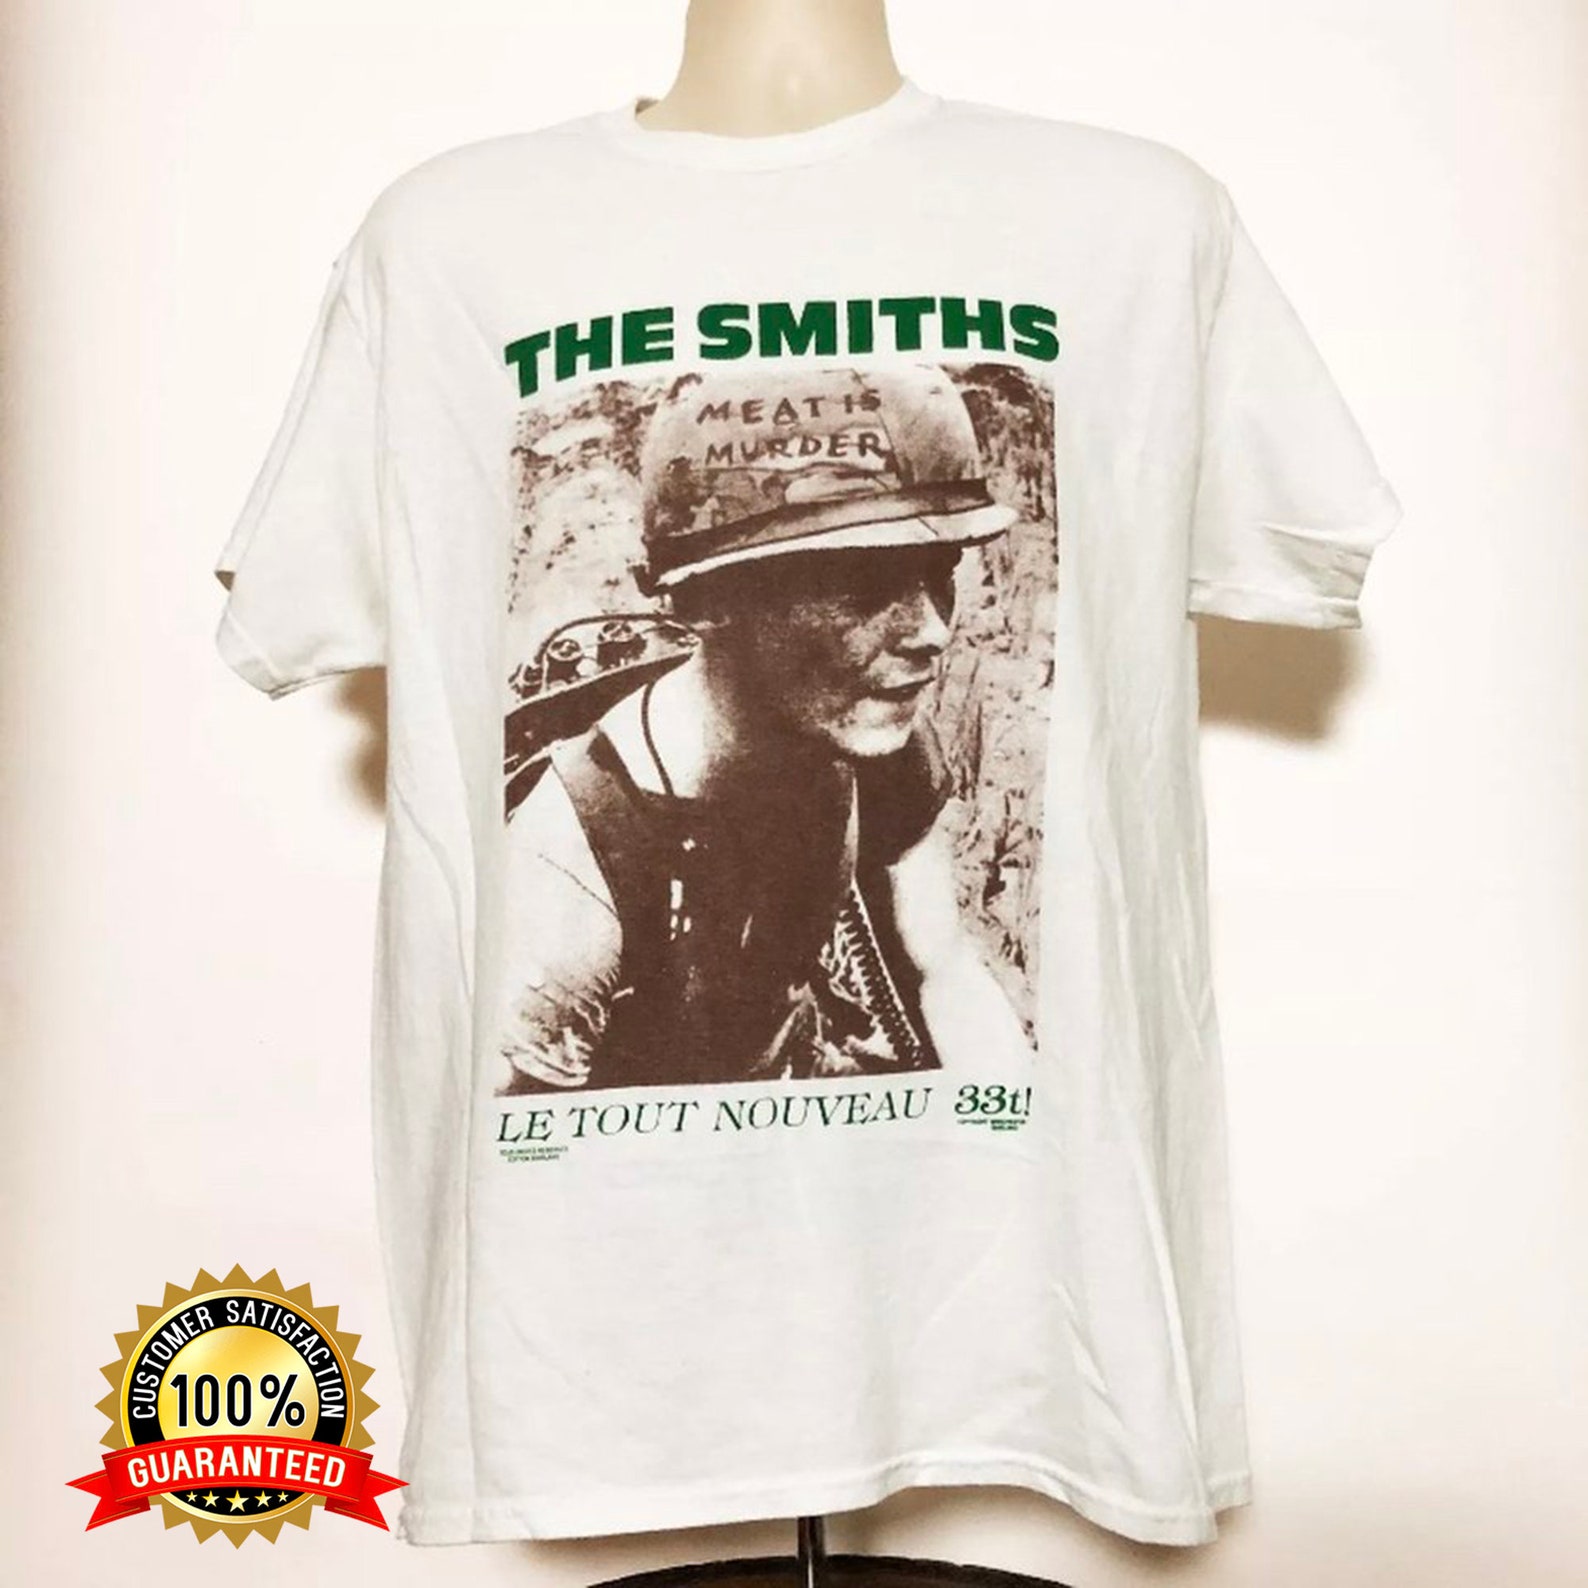 The Smiths T Shirt Vintage The Smiths T Shirt Morrissey Meat | Etsy